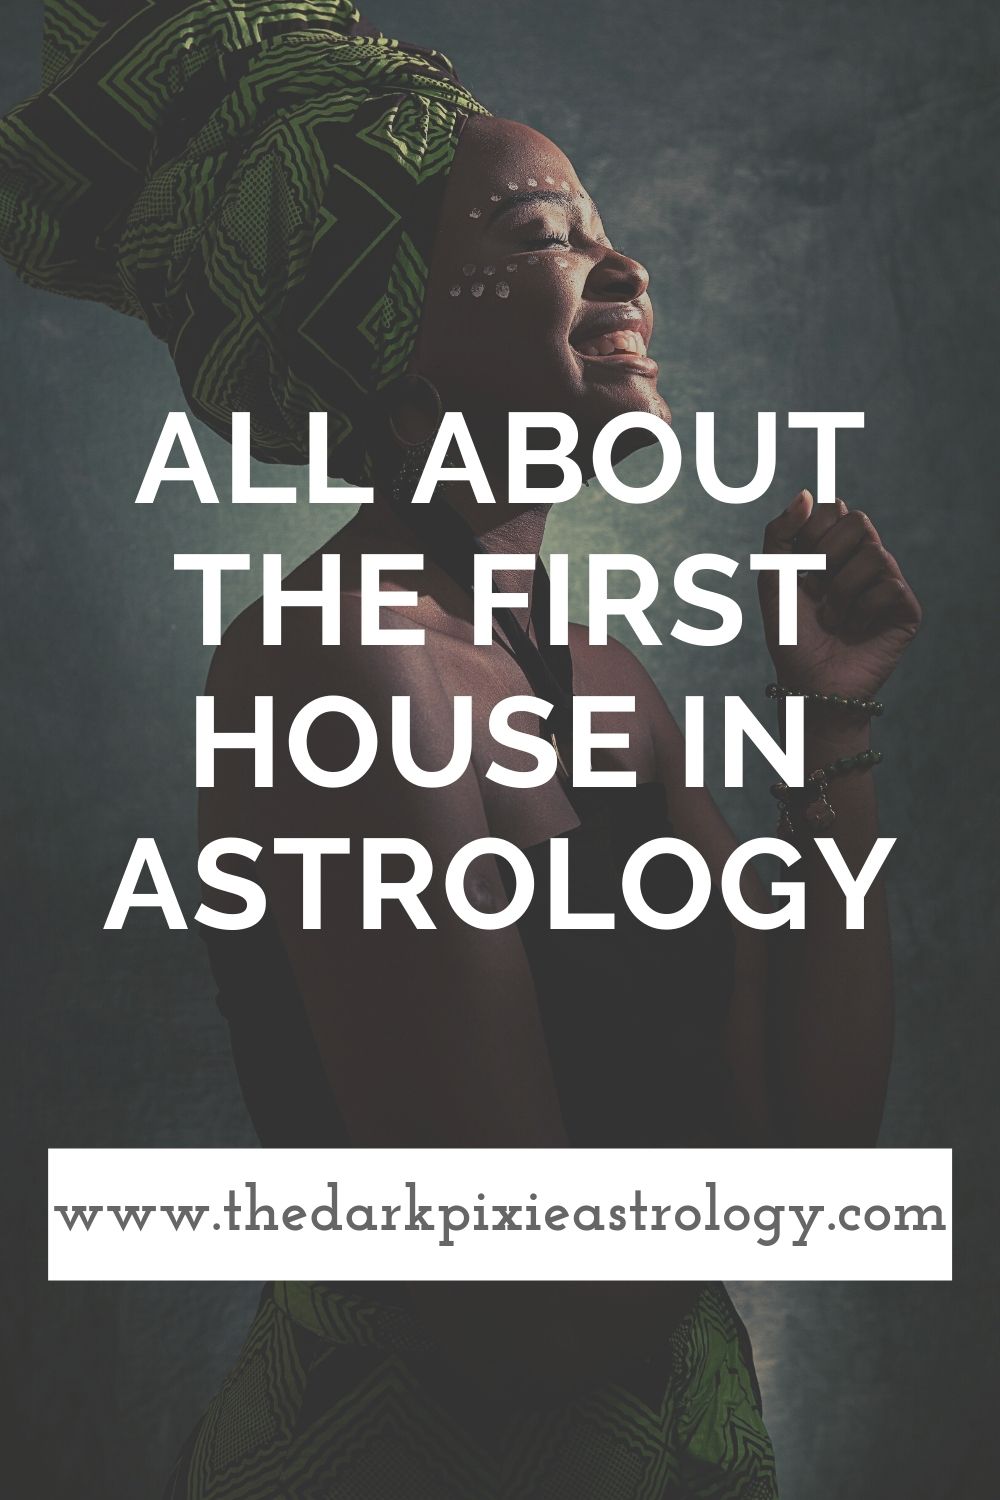 first house astrology